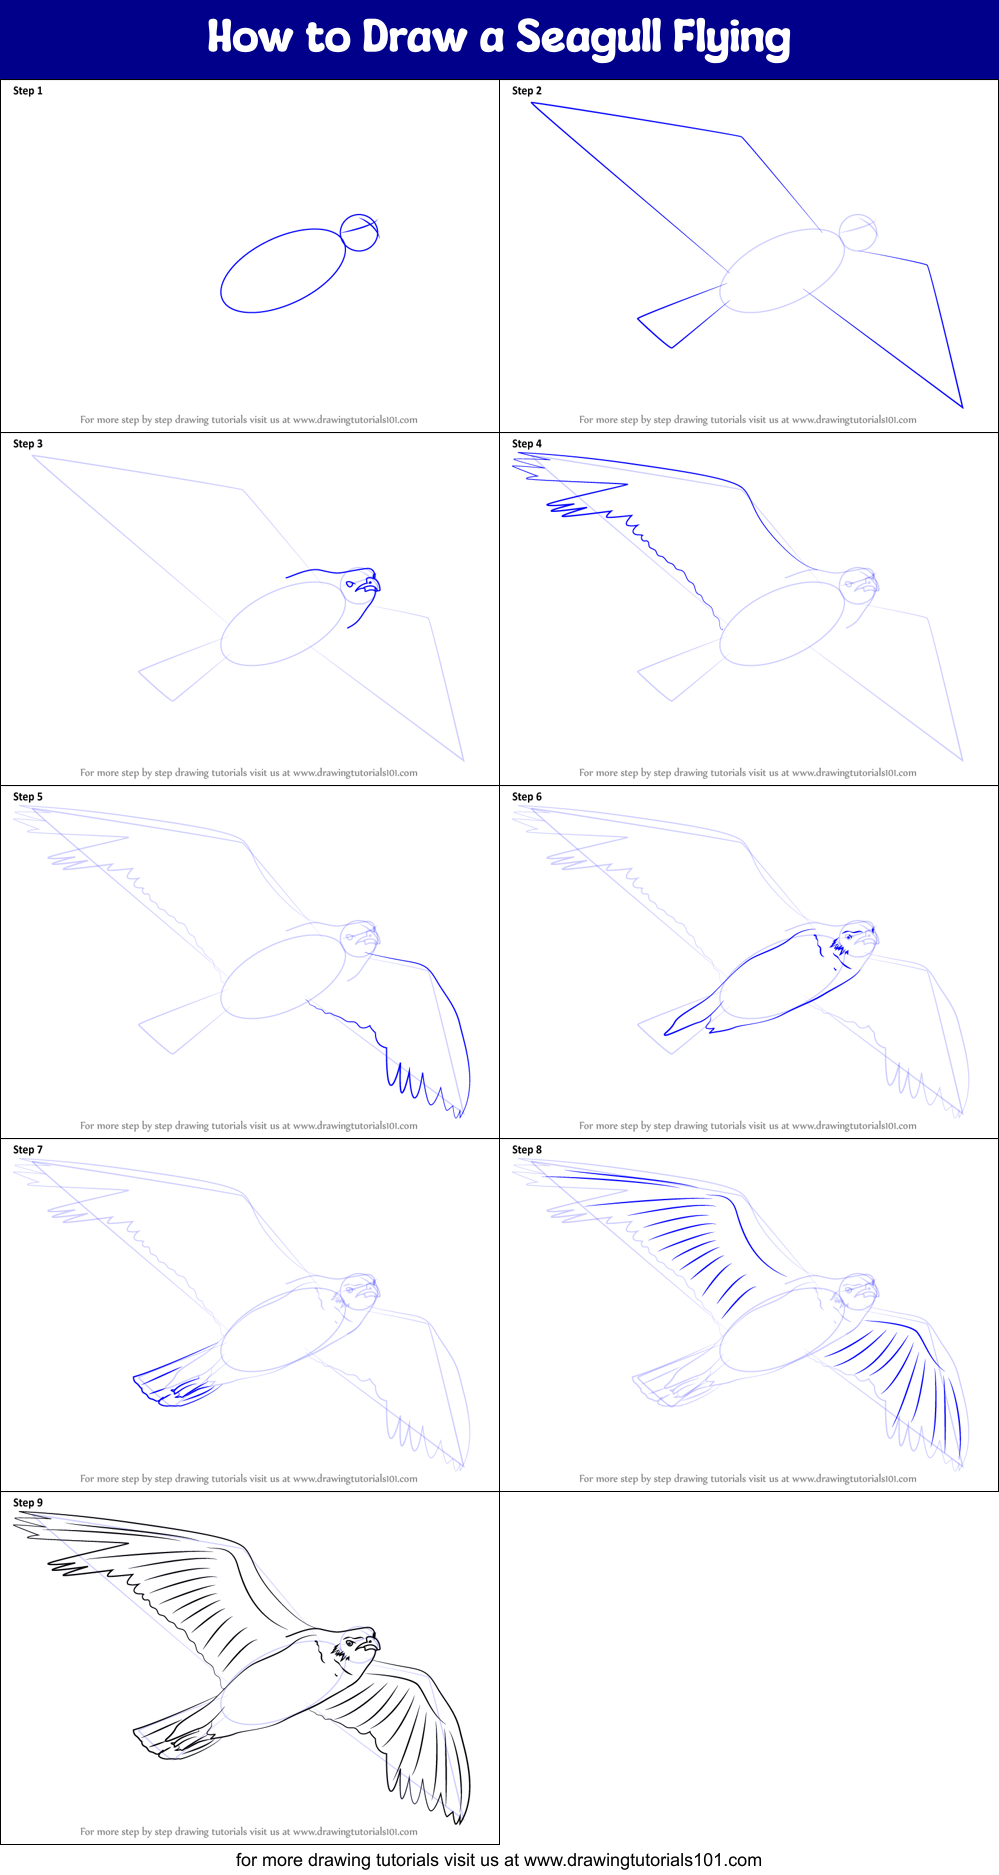 How to Draw a Seagull Flying printable step by step drawing sheet